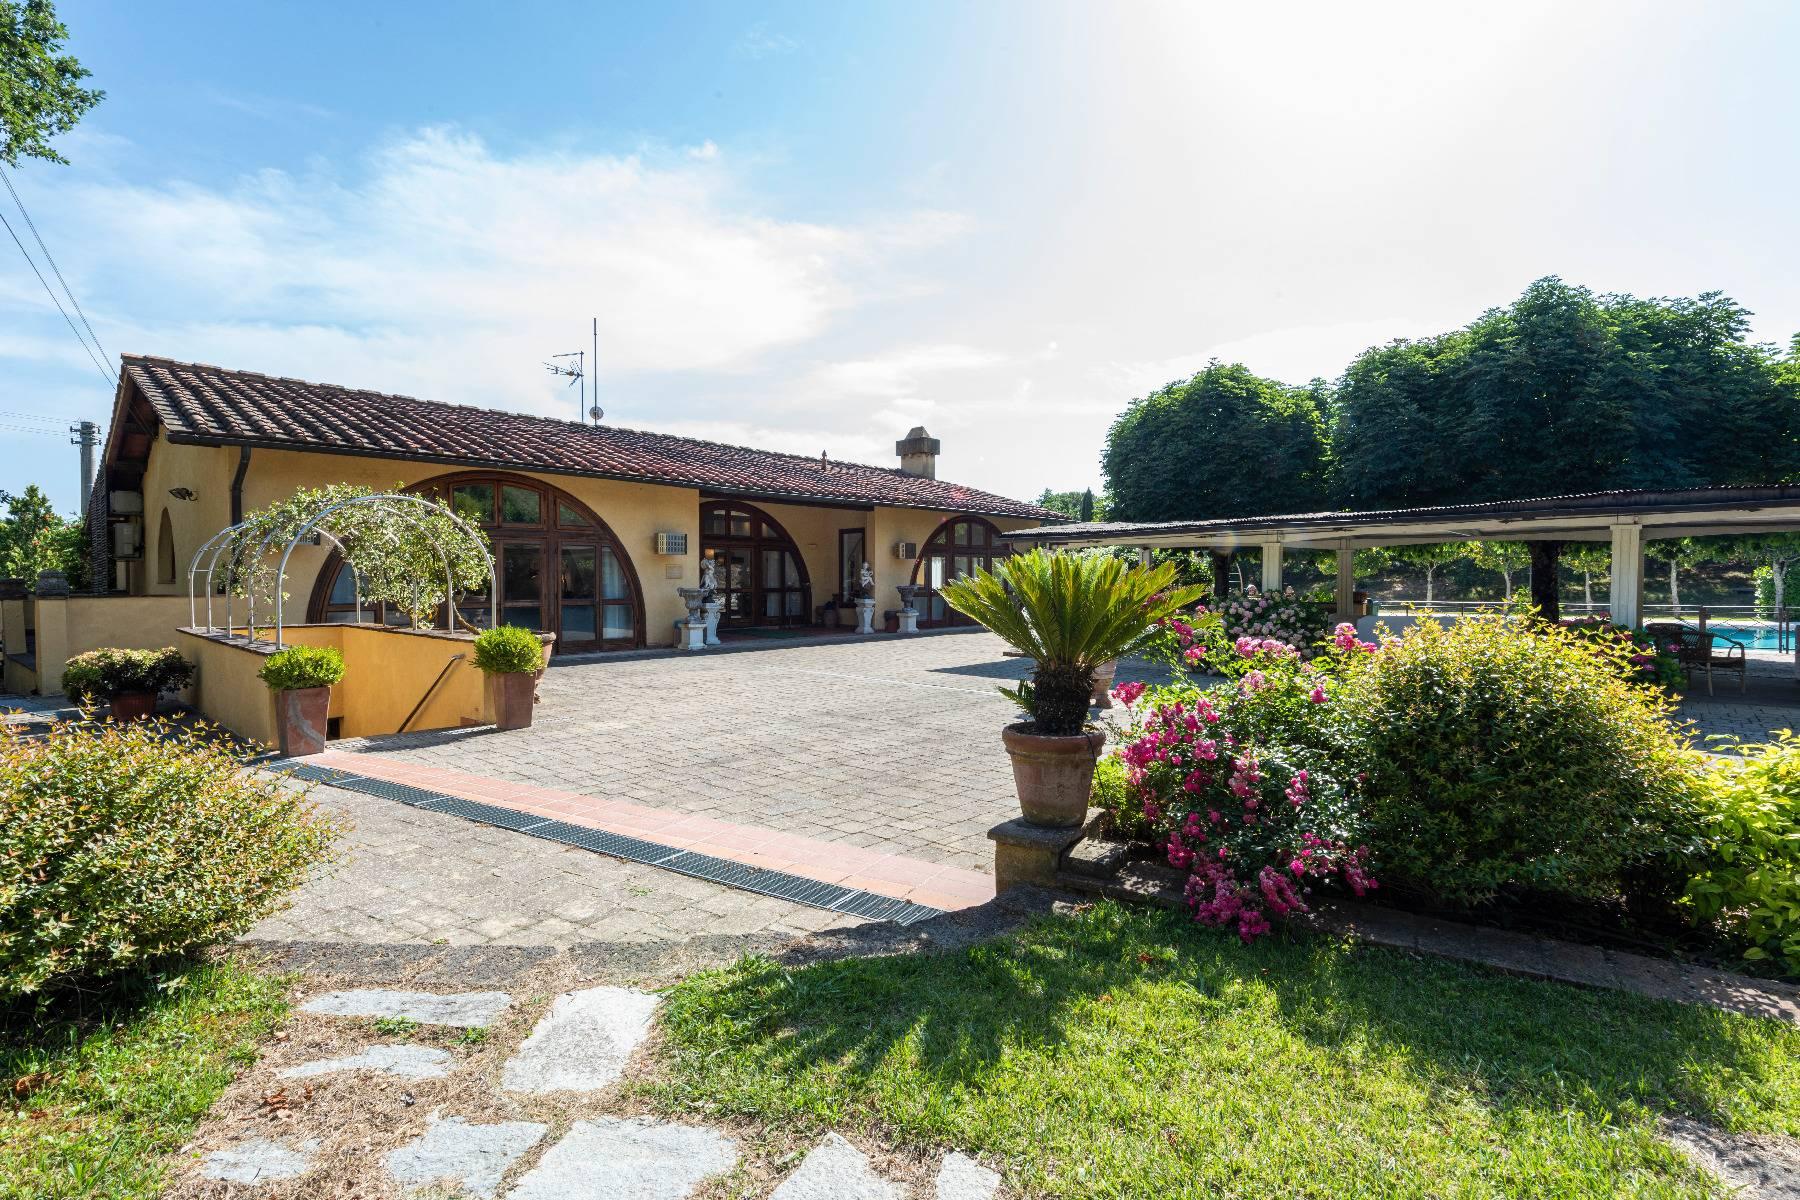 Exquisite property 17km from Florence - 6